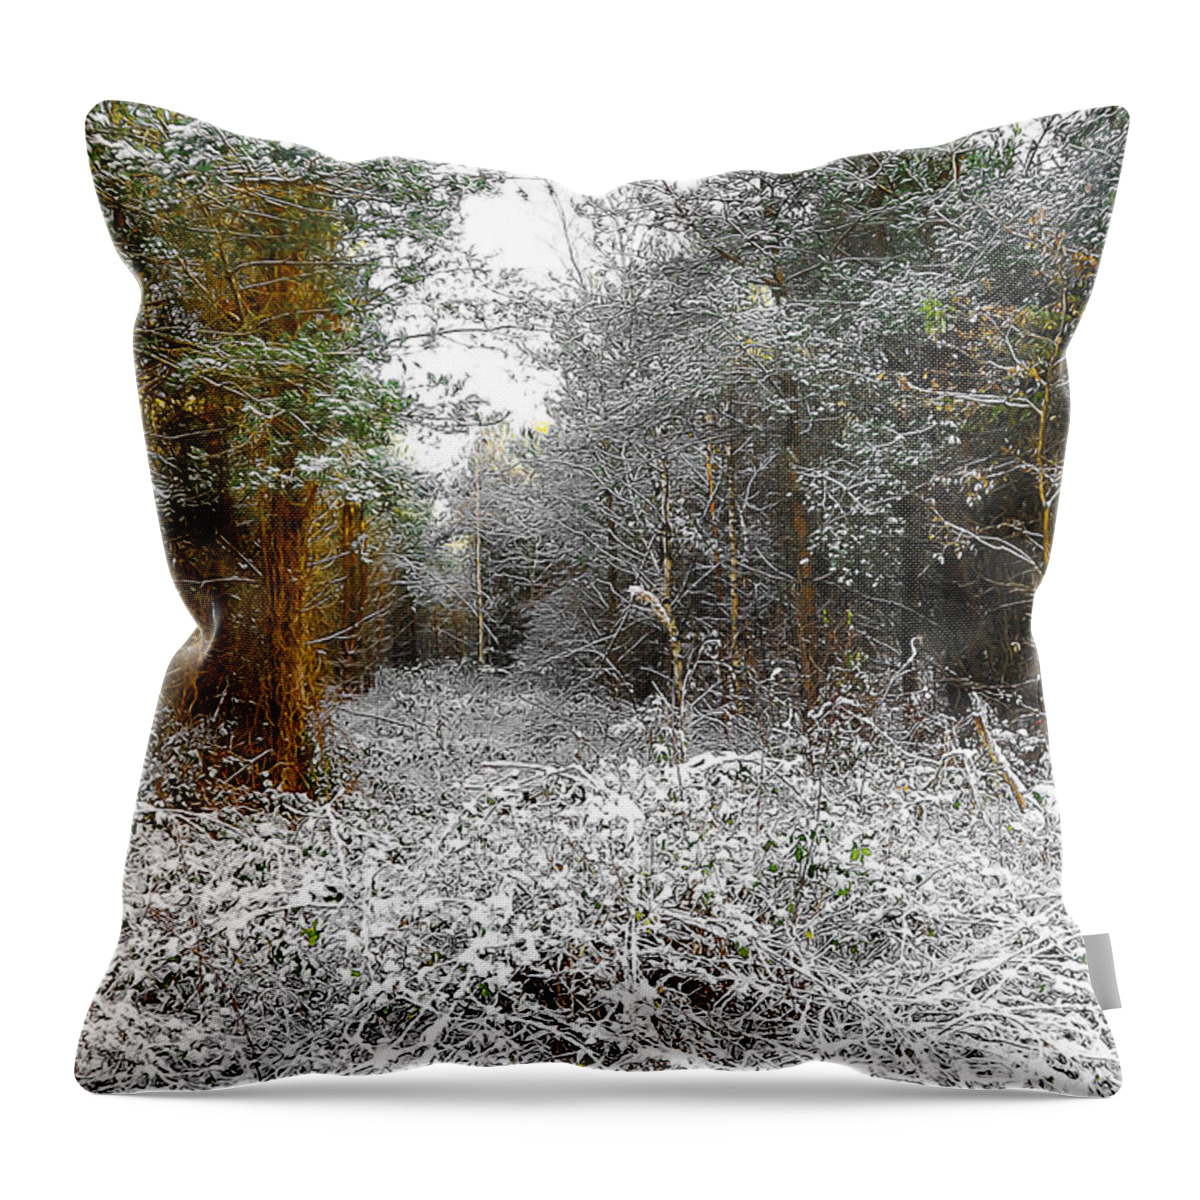 Abstract Throw Pillow featuring the digital art Winter Time #3 by Svetlana Sewell